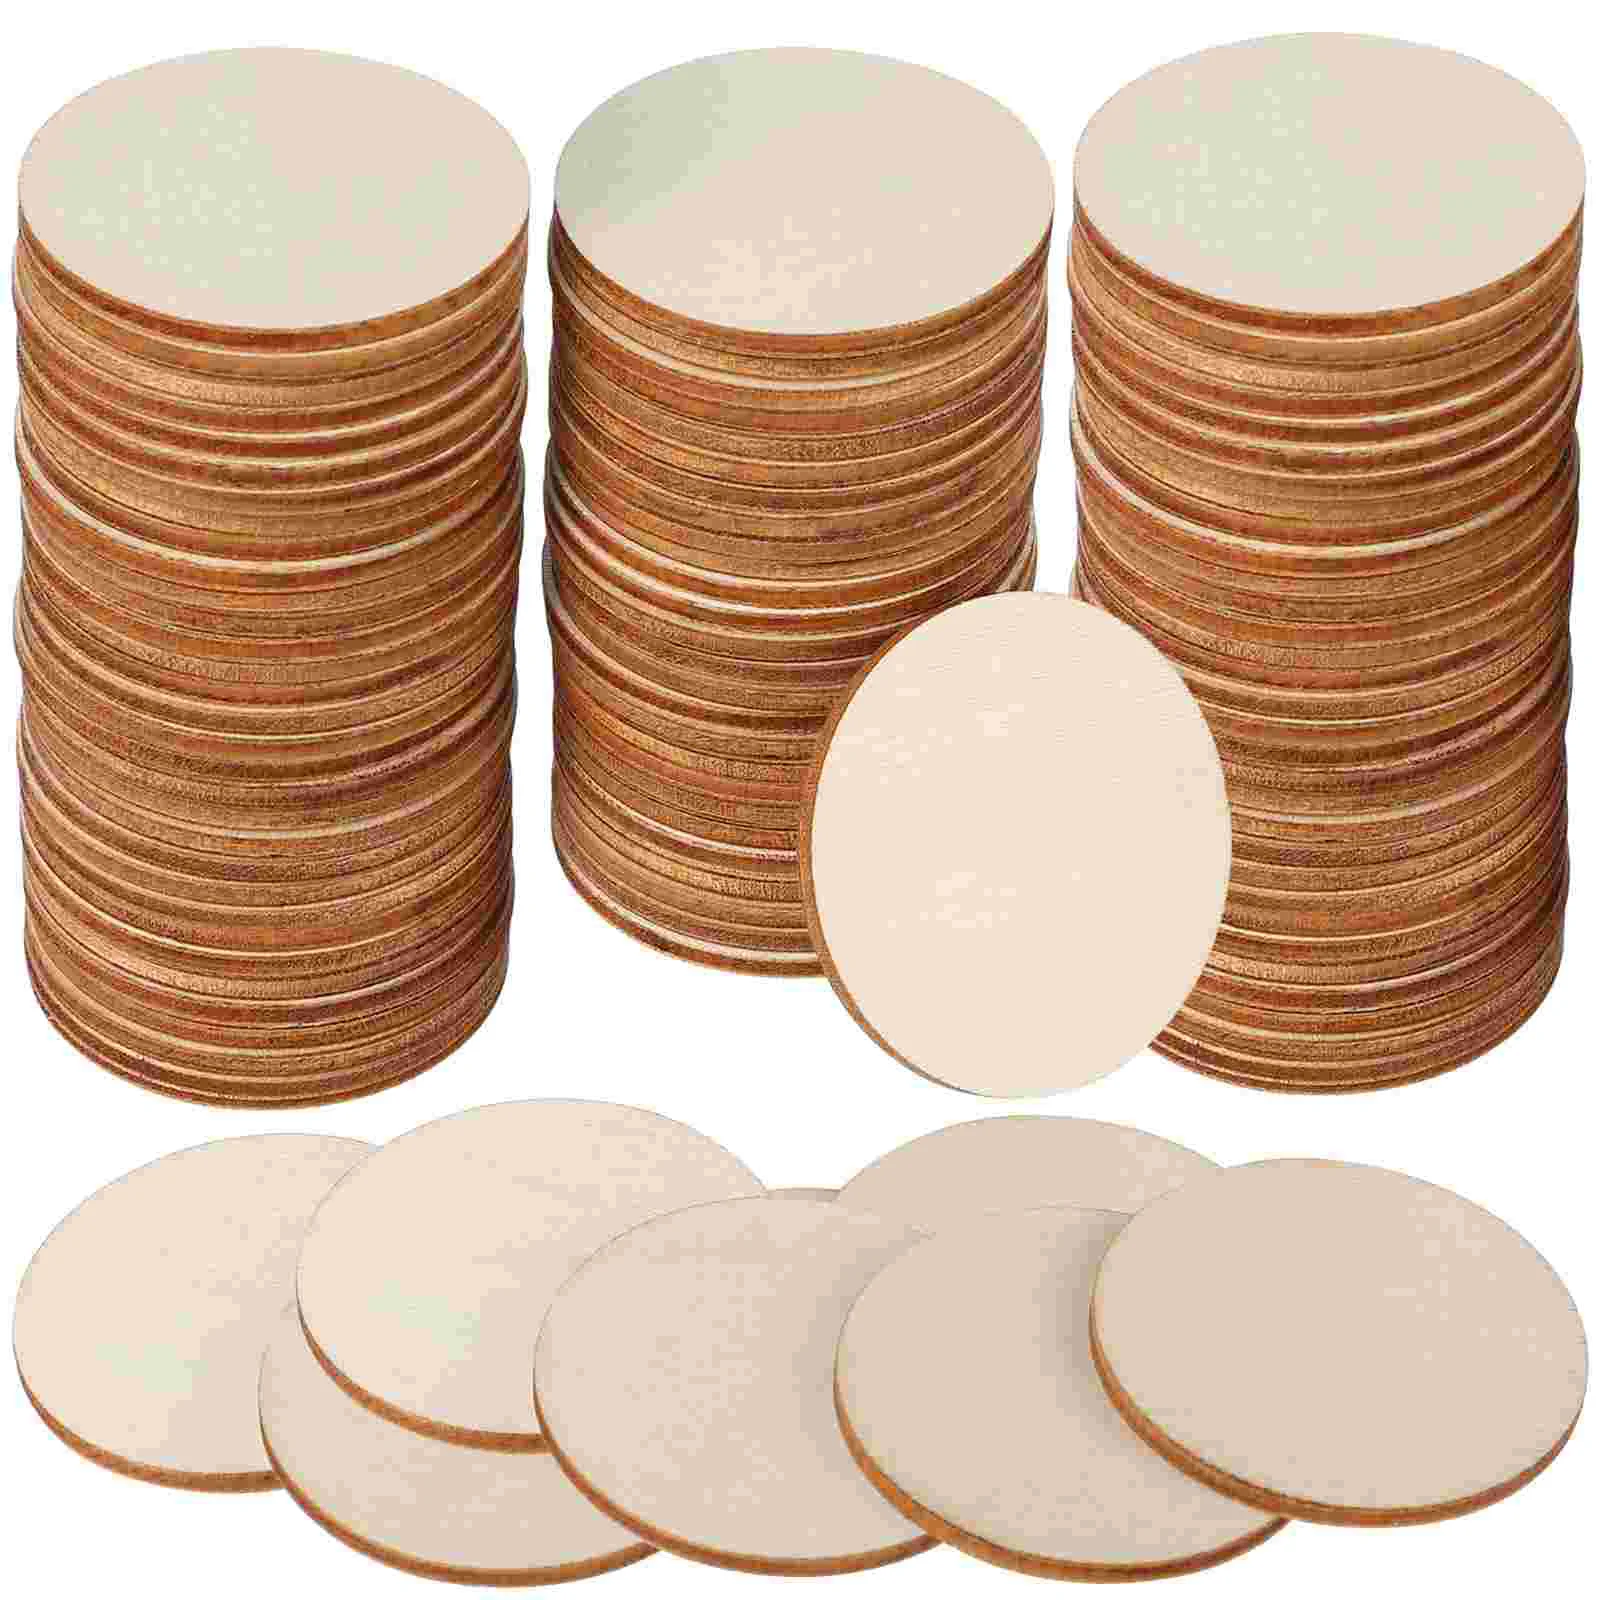 

Wood Unfinished Wooden Craft Pieces Disk Unpainted Diy Tags Gift Shape Crafts Cutouts Shapes Circles Round Chips Discs Ornaments